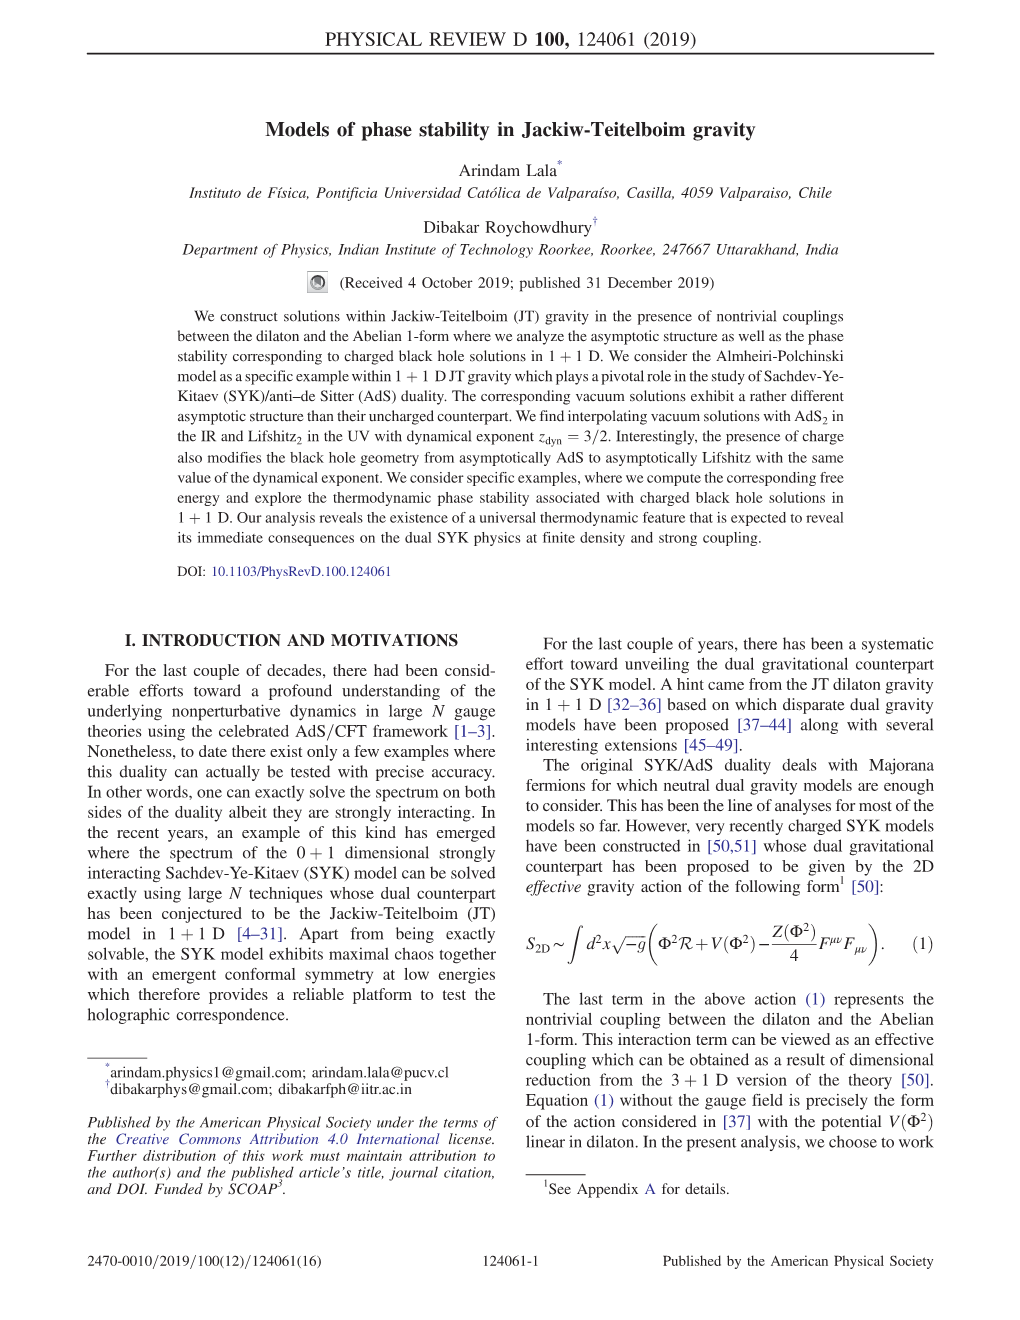 Models of Phase Stability in Jackiw-Teitelboim Gravity